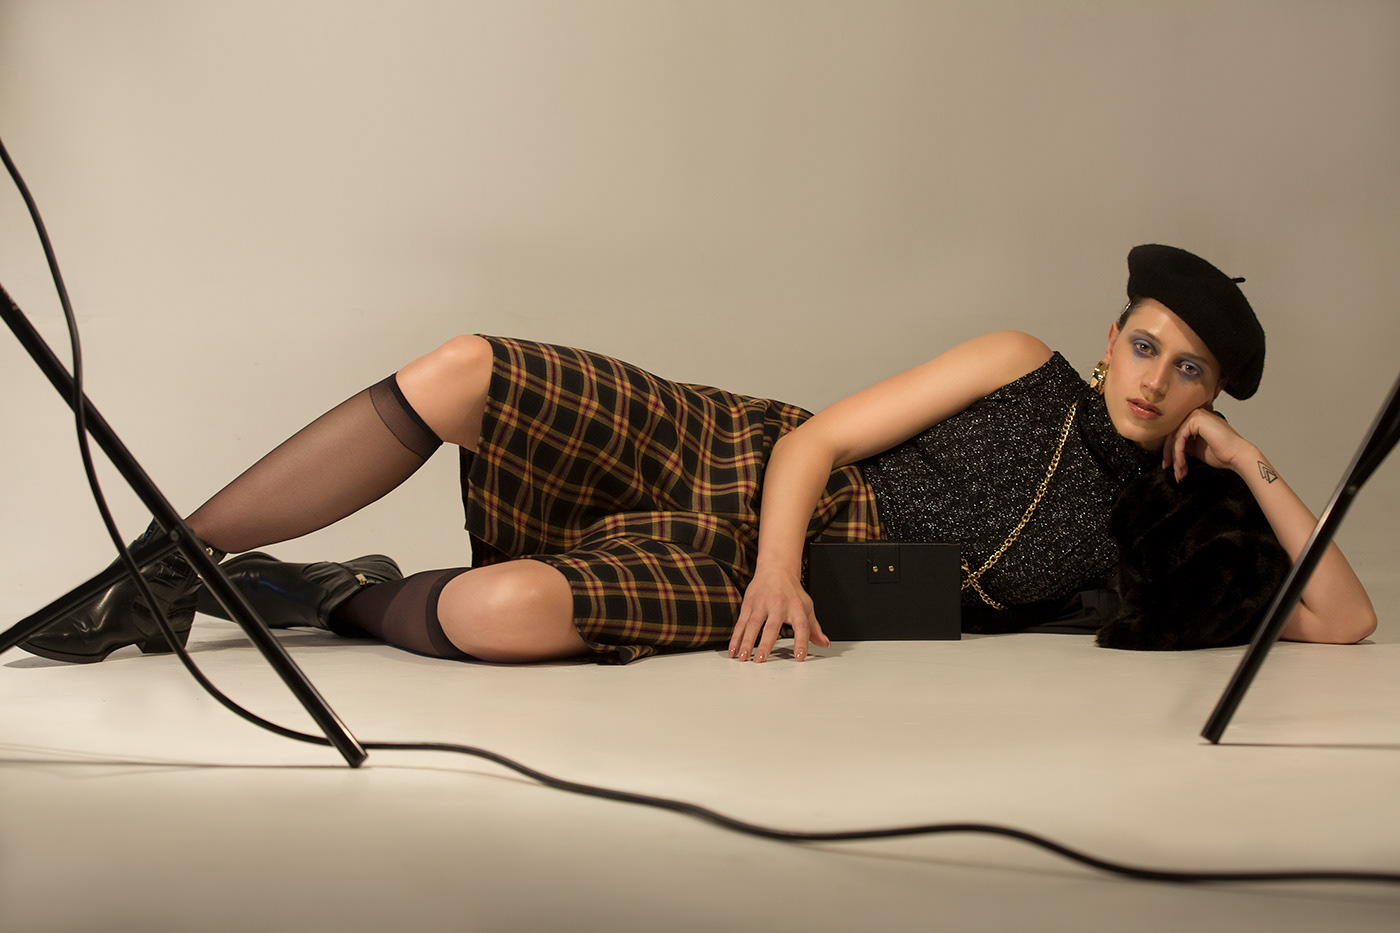 rings coat boots editorial cover magazine behindthescenes French skirt Rocker